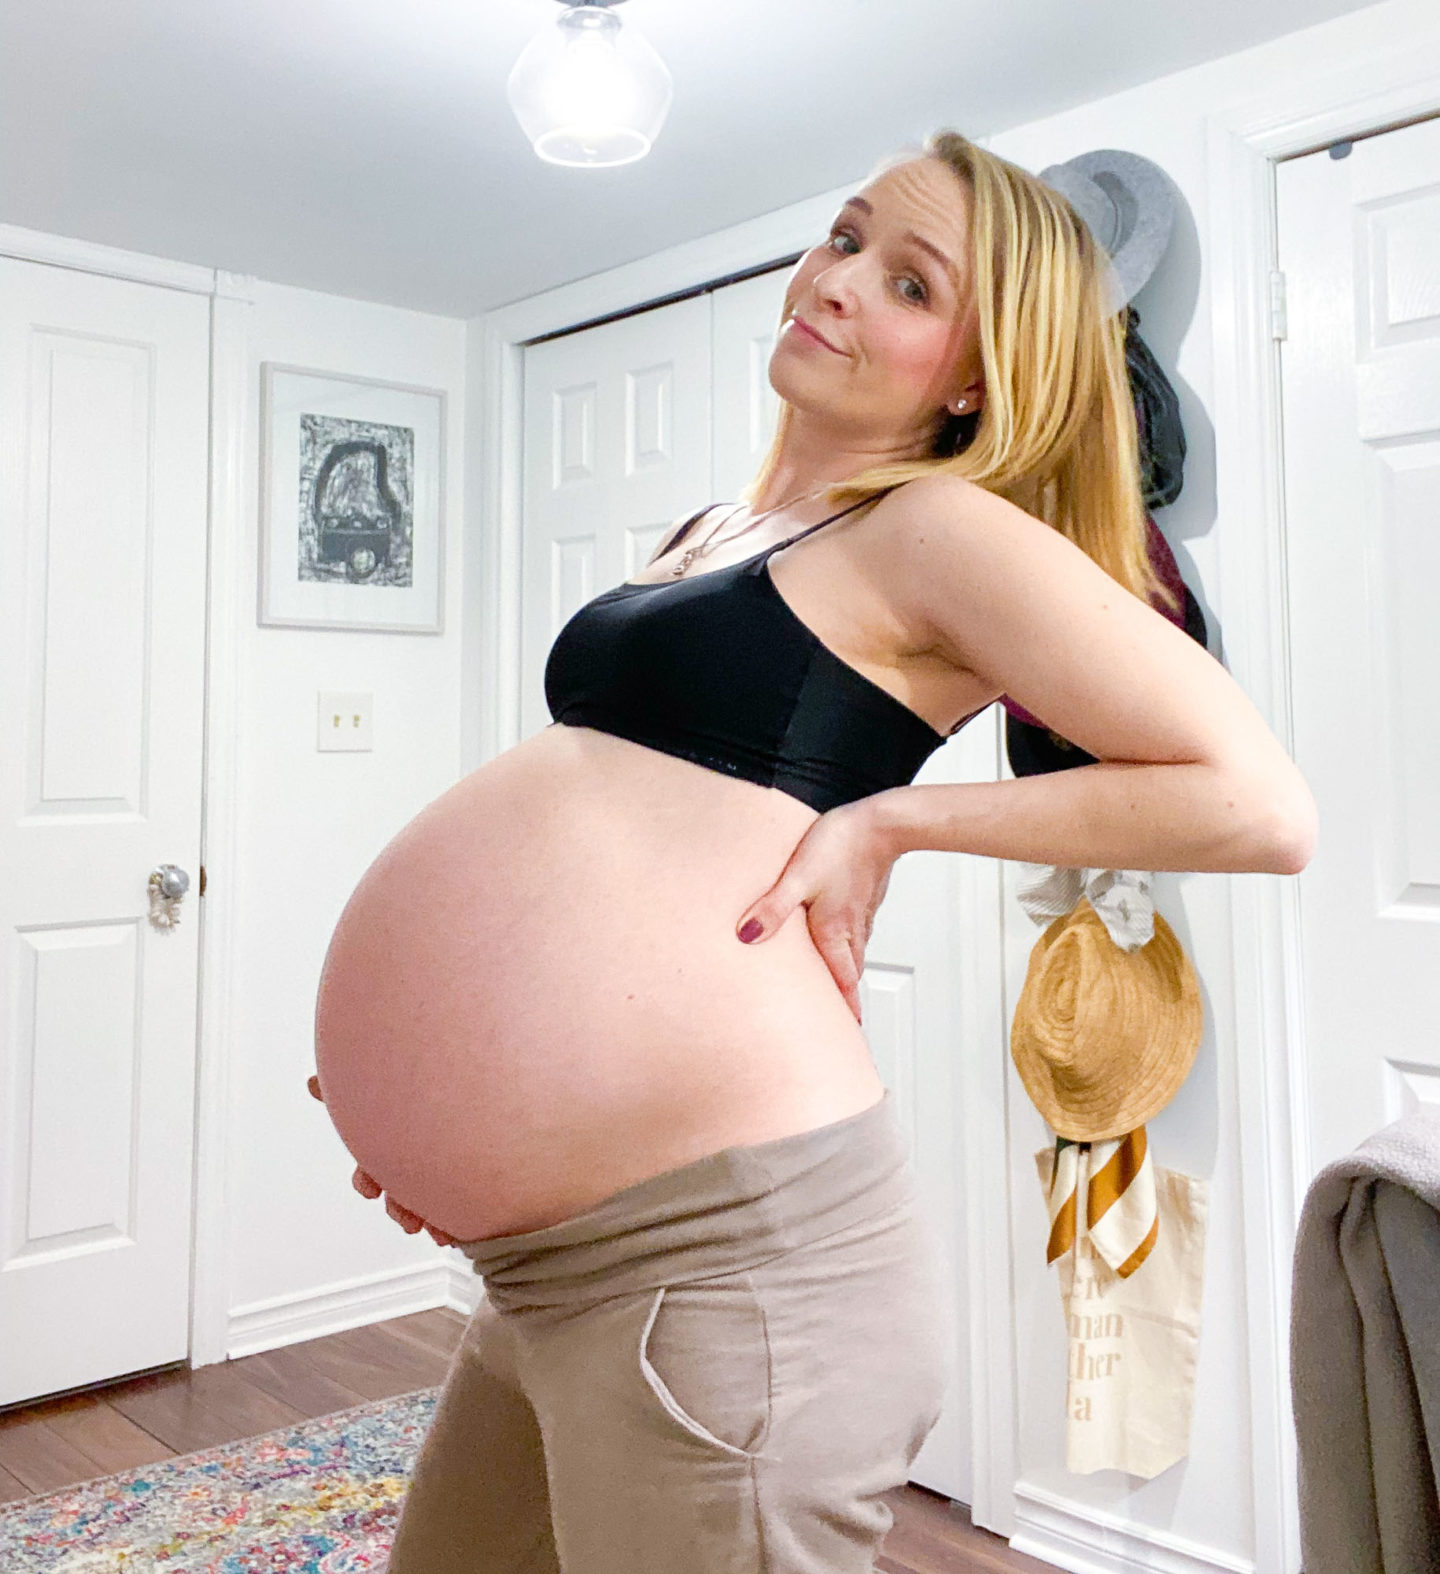 struckblog pregnant blogger in her third trimester with an exposed baby belly